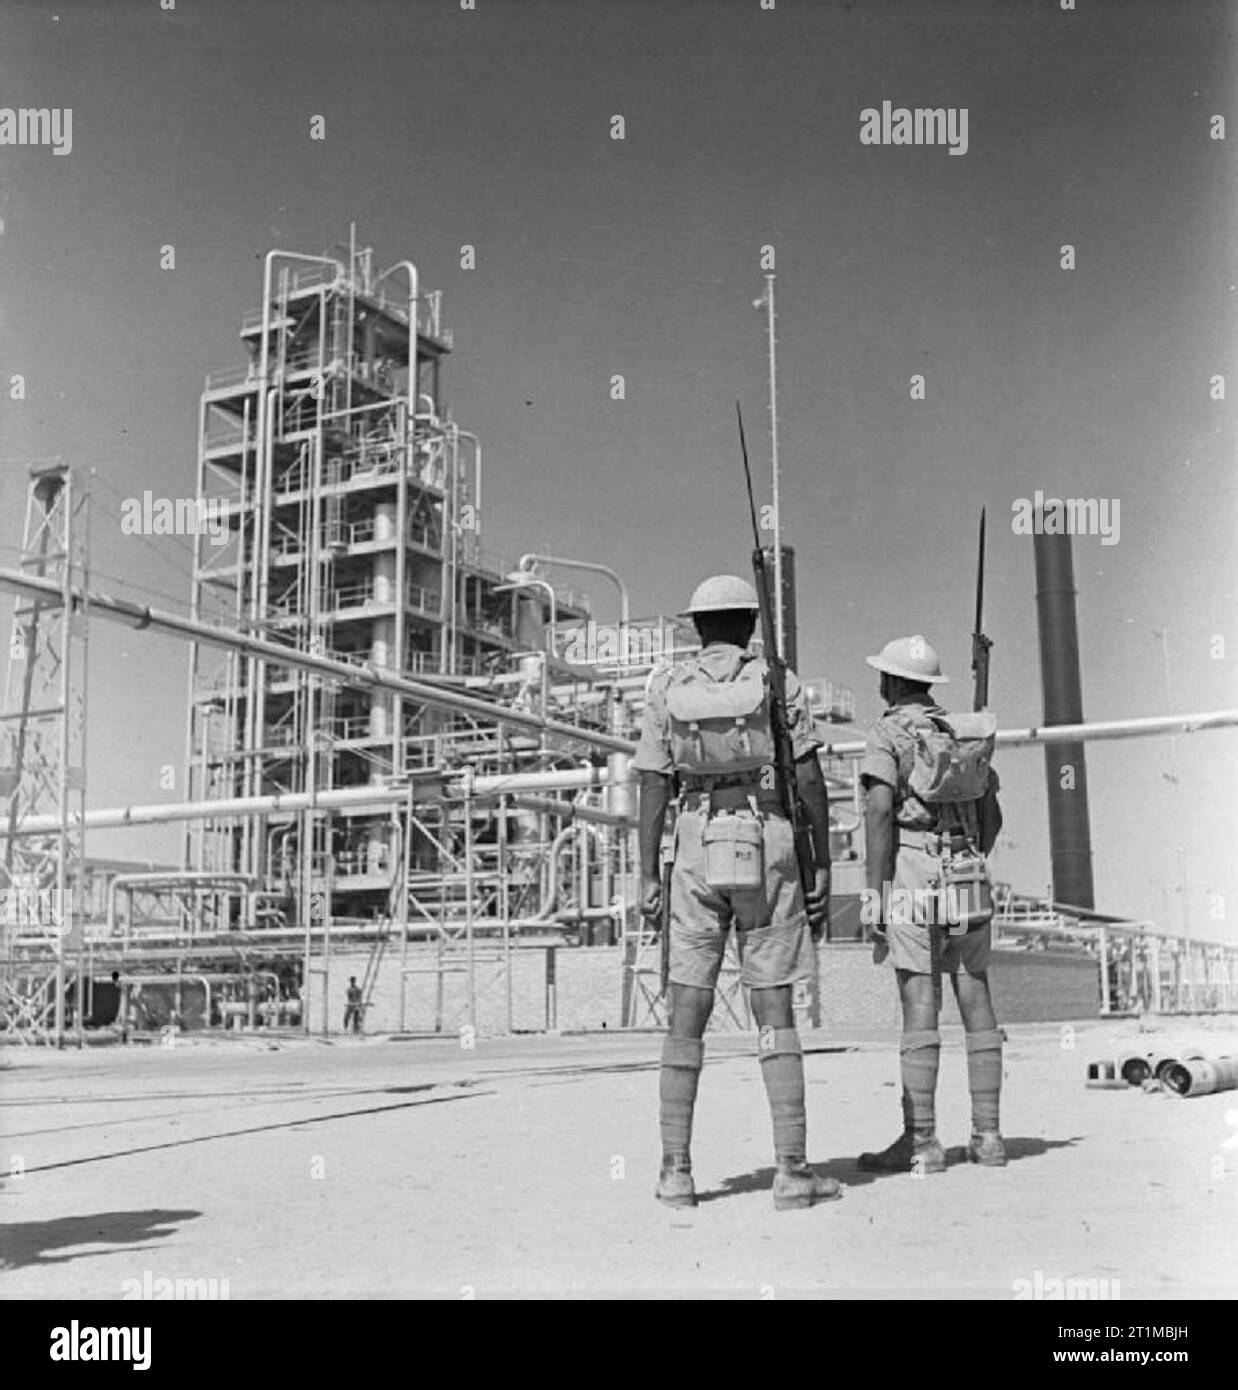 The British Army in the Middle East 1941 Indian riflemen guarding an oil refinery on the island of Aradian in Iran, 4 September 1941. Stock Photo